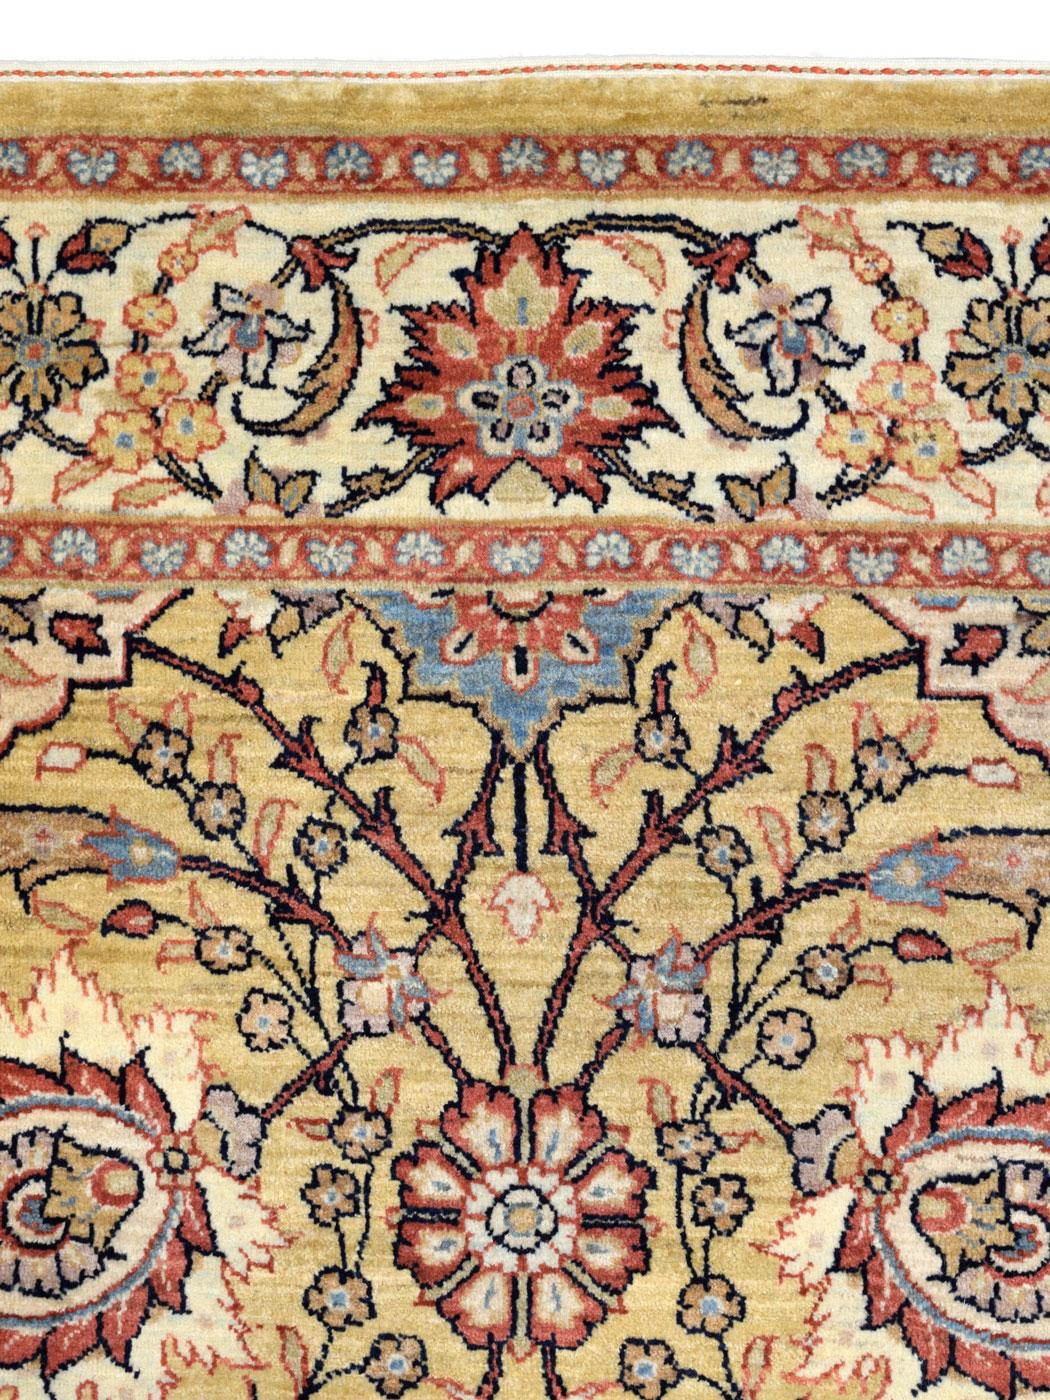 Contemporary Pure Wool Mohtasham Persian Carpet, Cream, Red, and Blue, 5' x 7' For Sale